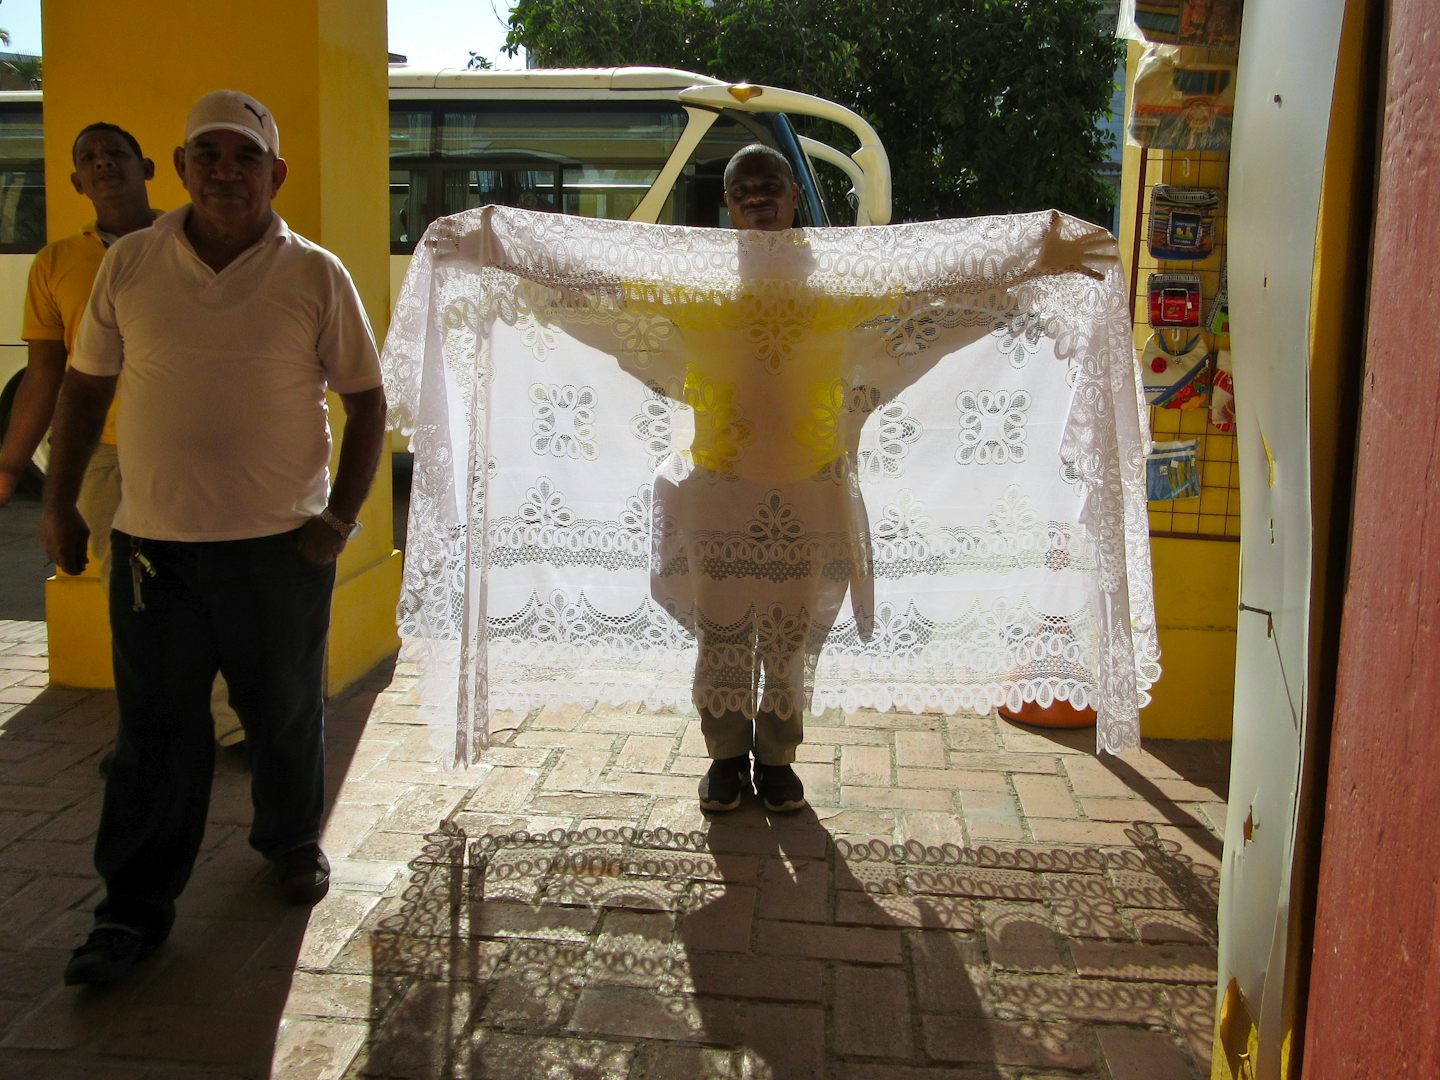 Tablecloth vendor in Cartagena at "shopping opportunity." I bought